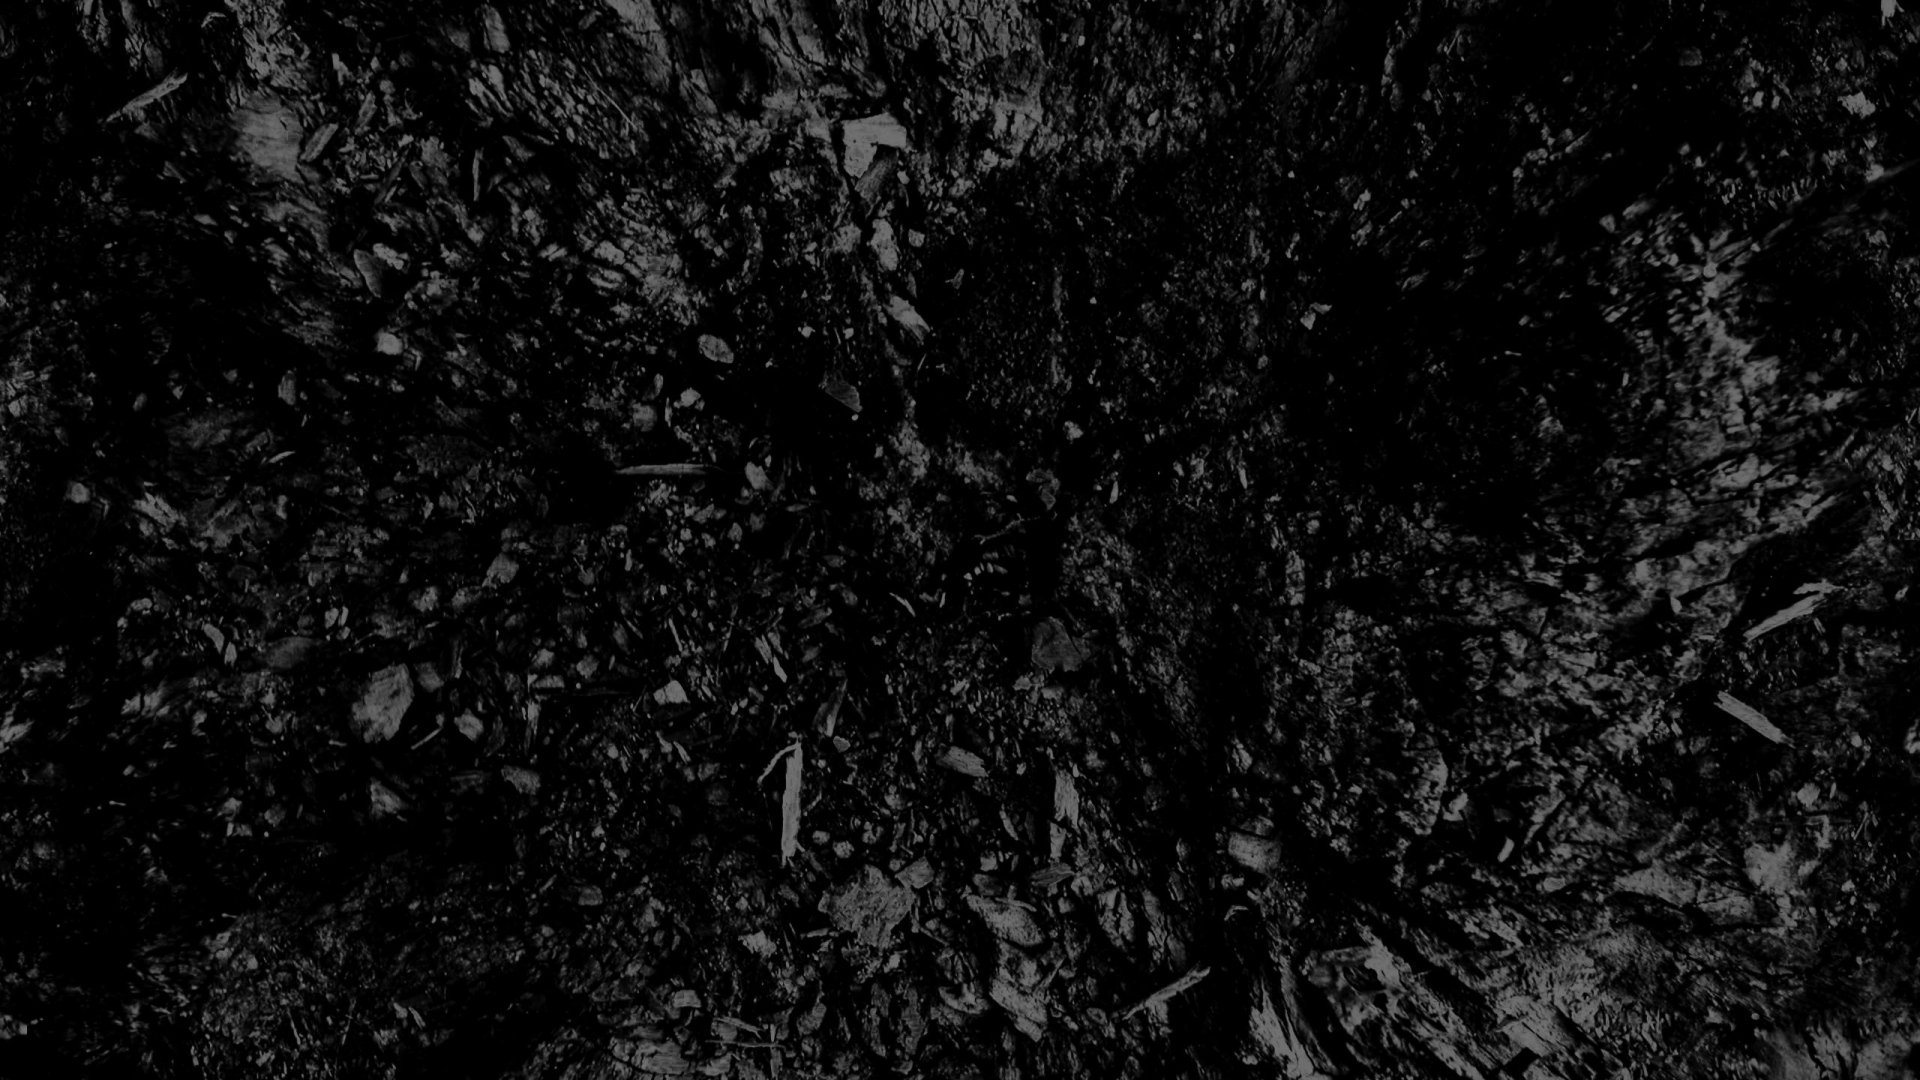 Download Wallpaper 1920x1080 Dark, Black and white, Abstract ...